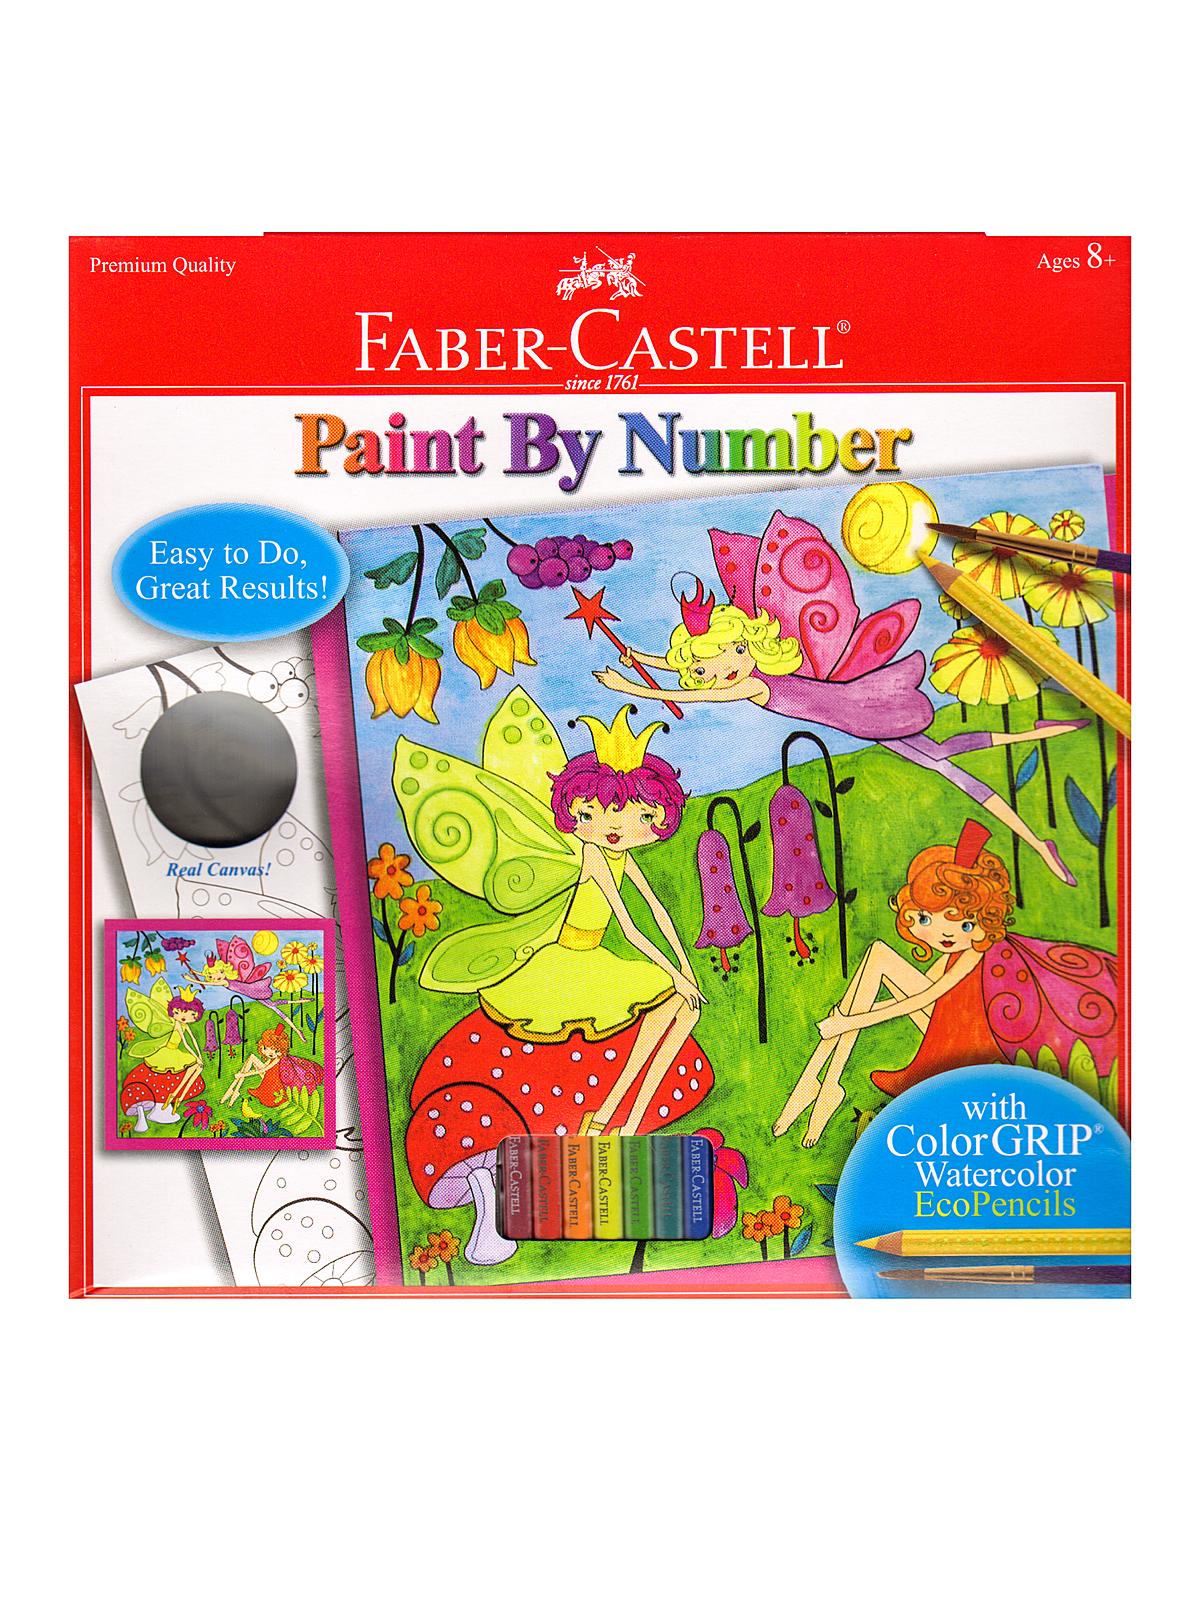 Paint By Number With Watercolor Pencils Kits Fairy Garden